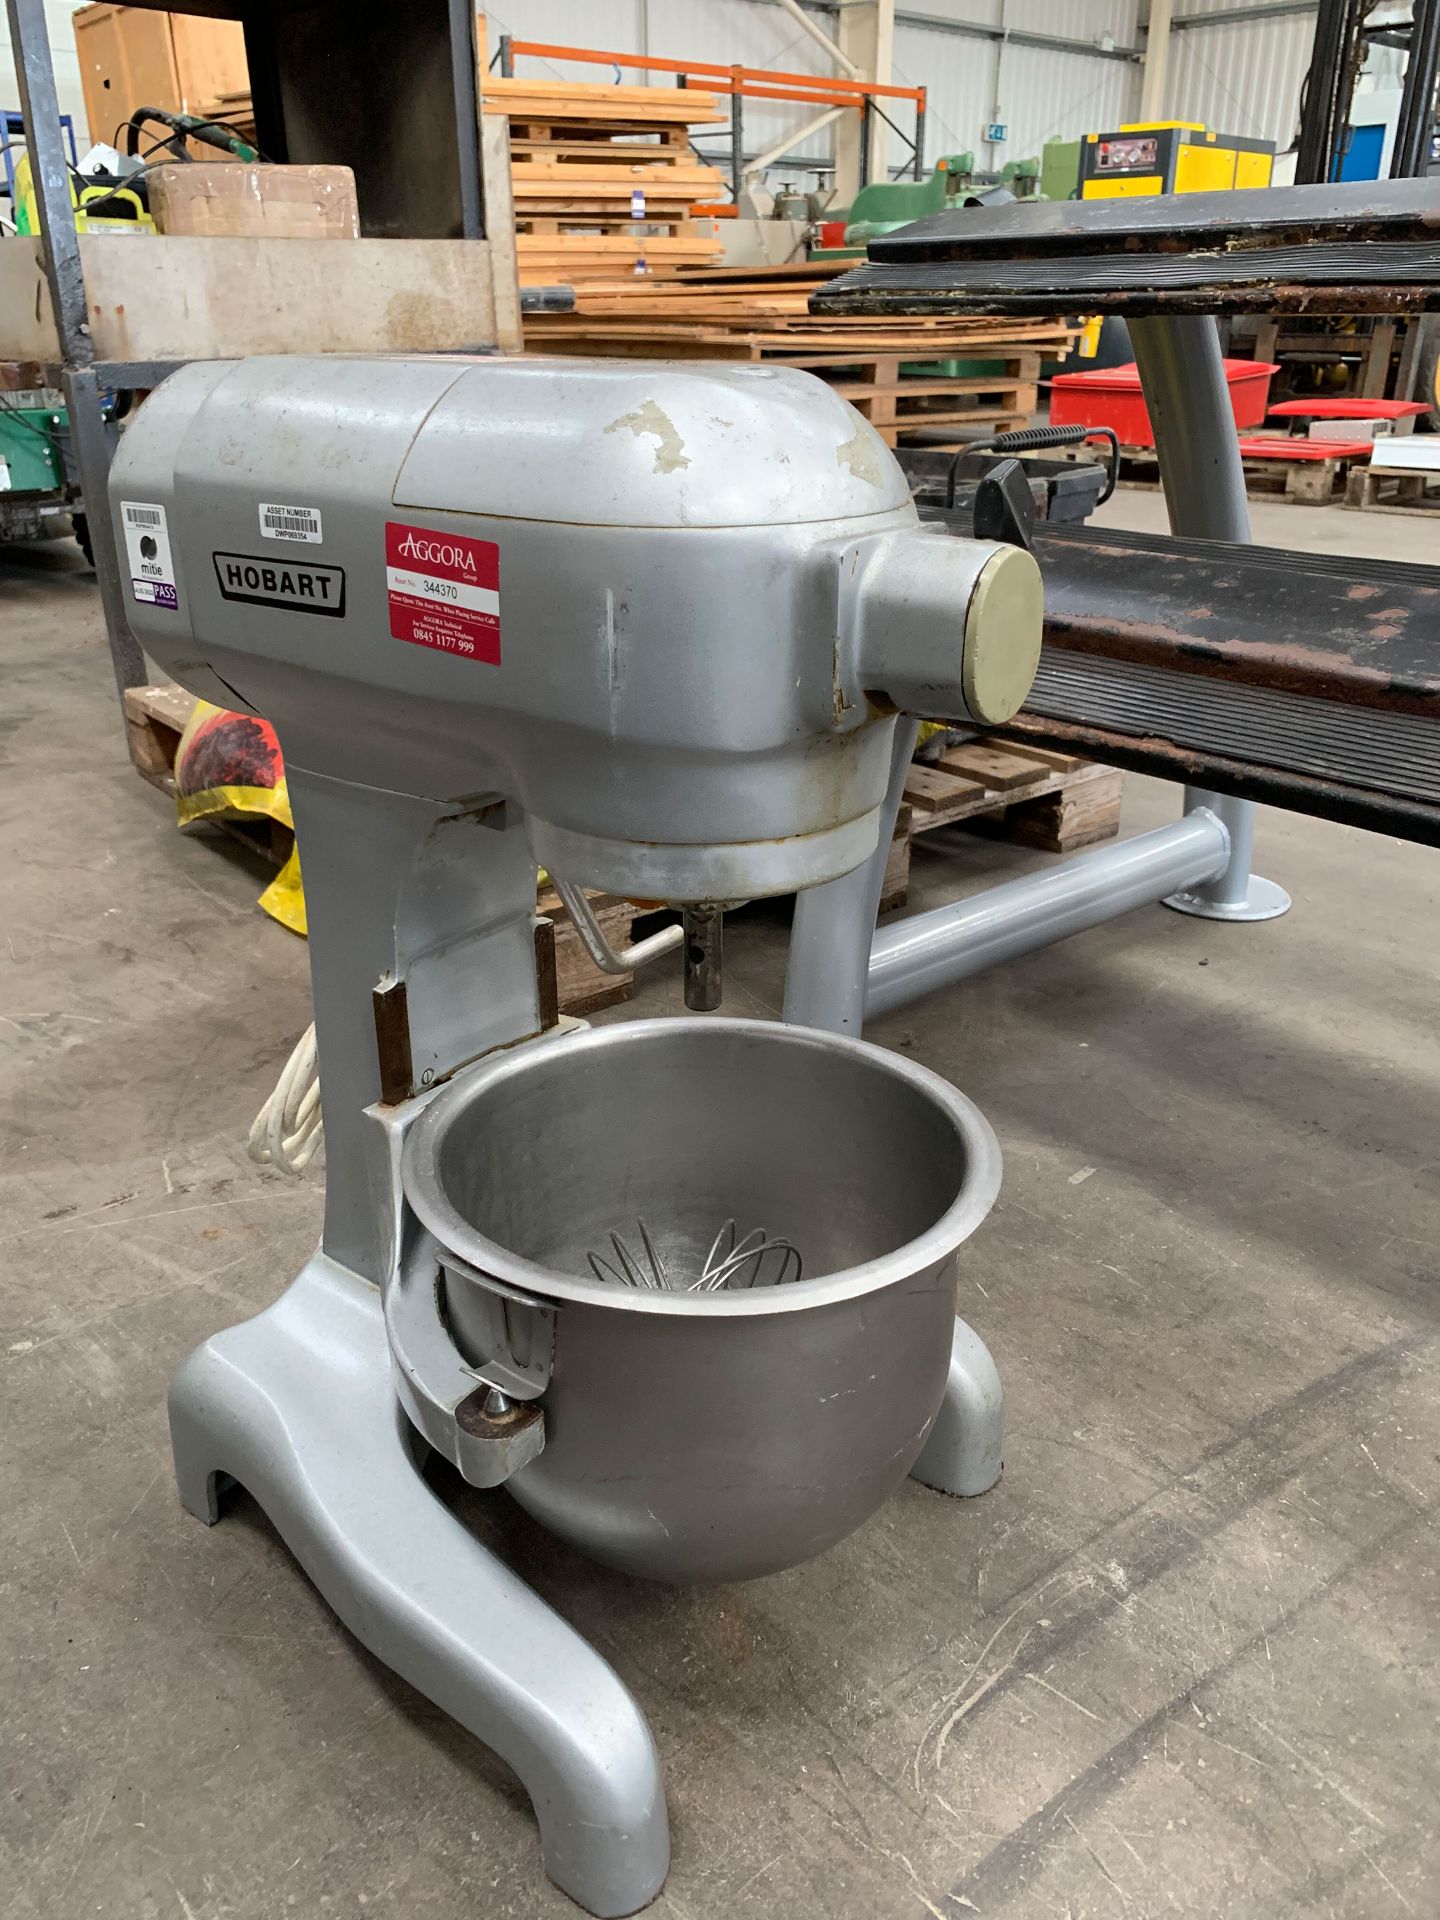 Hobart Commercial Mixer with Bowl and Whisk Attachment